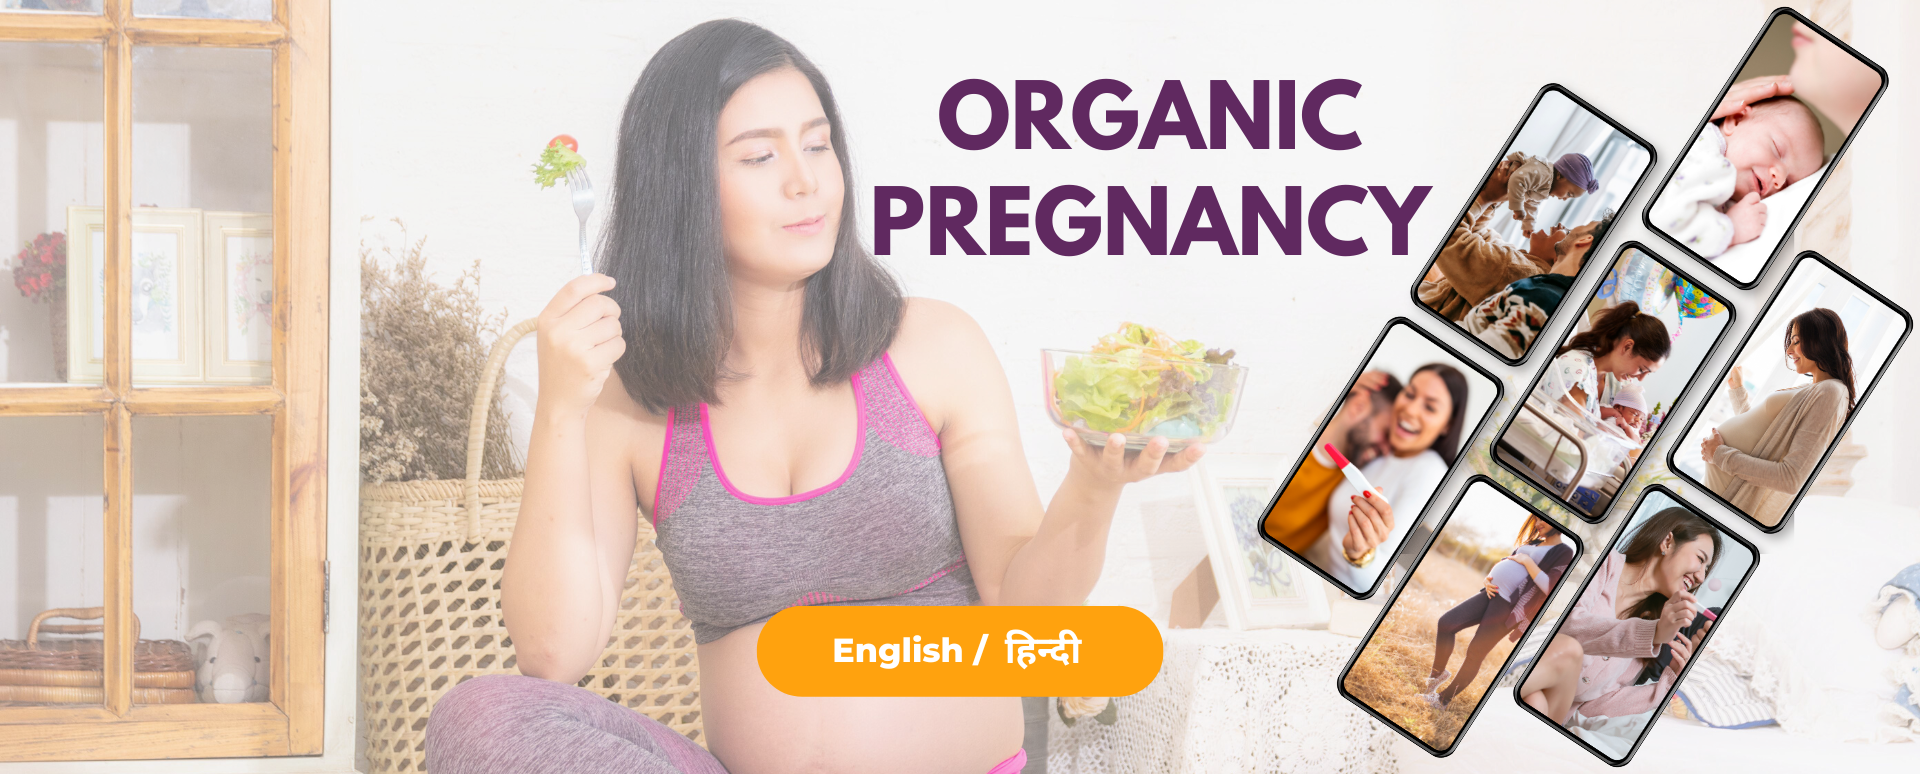 organic pregnancy products